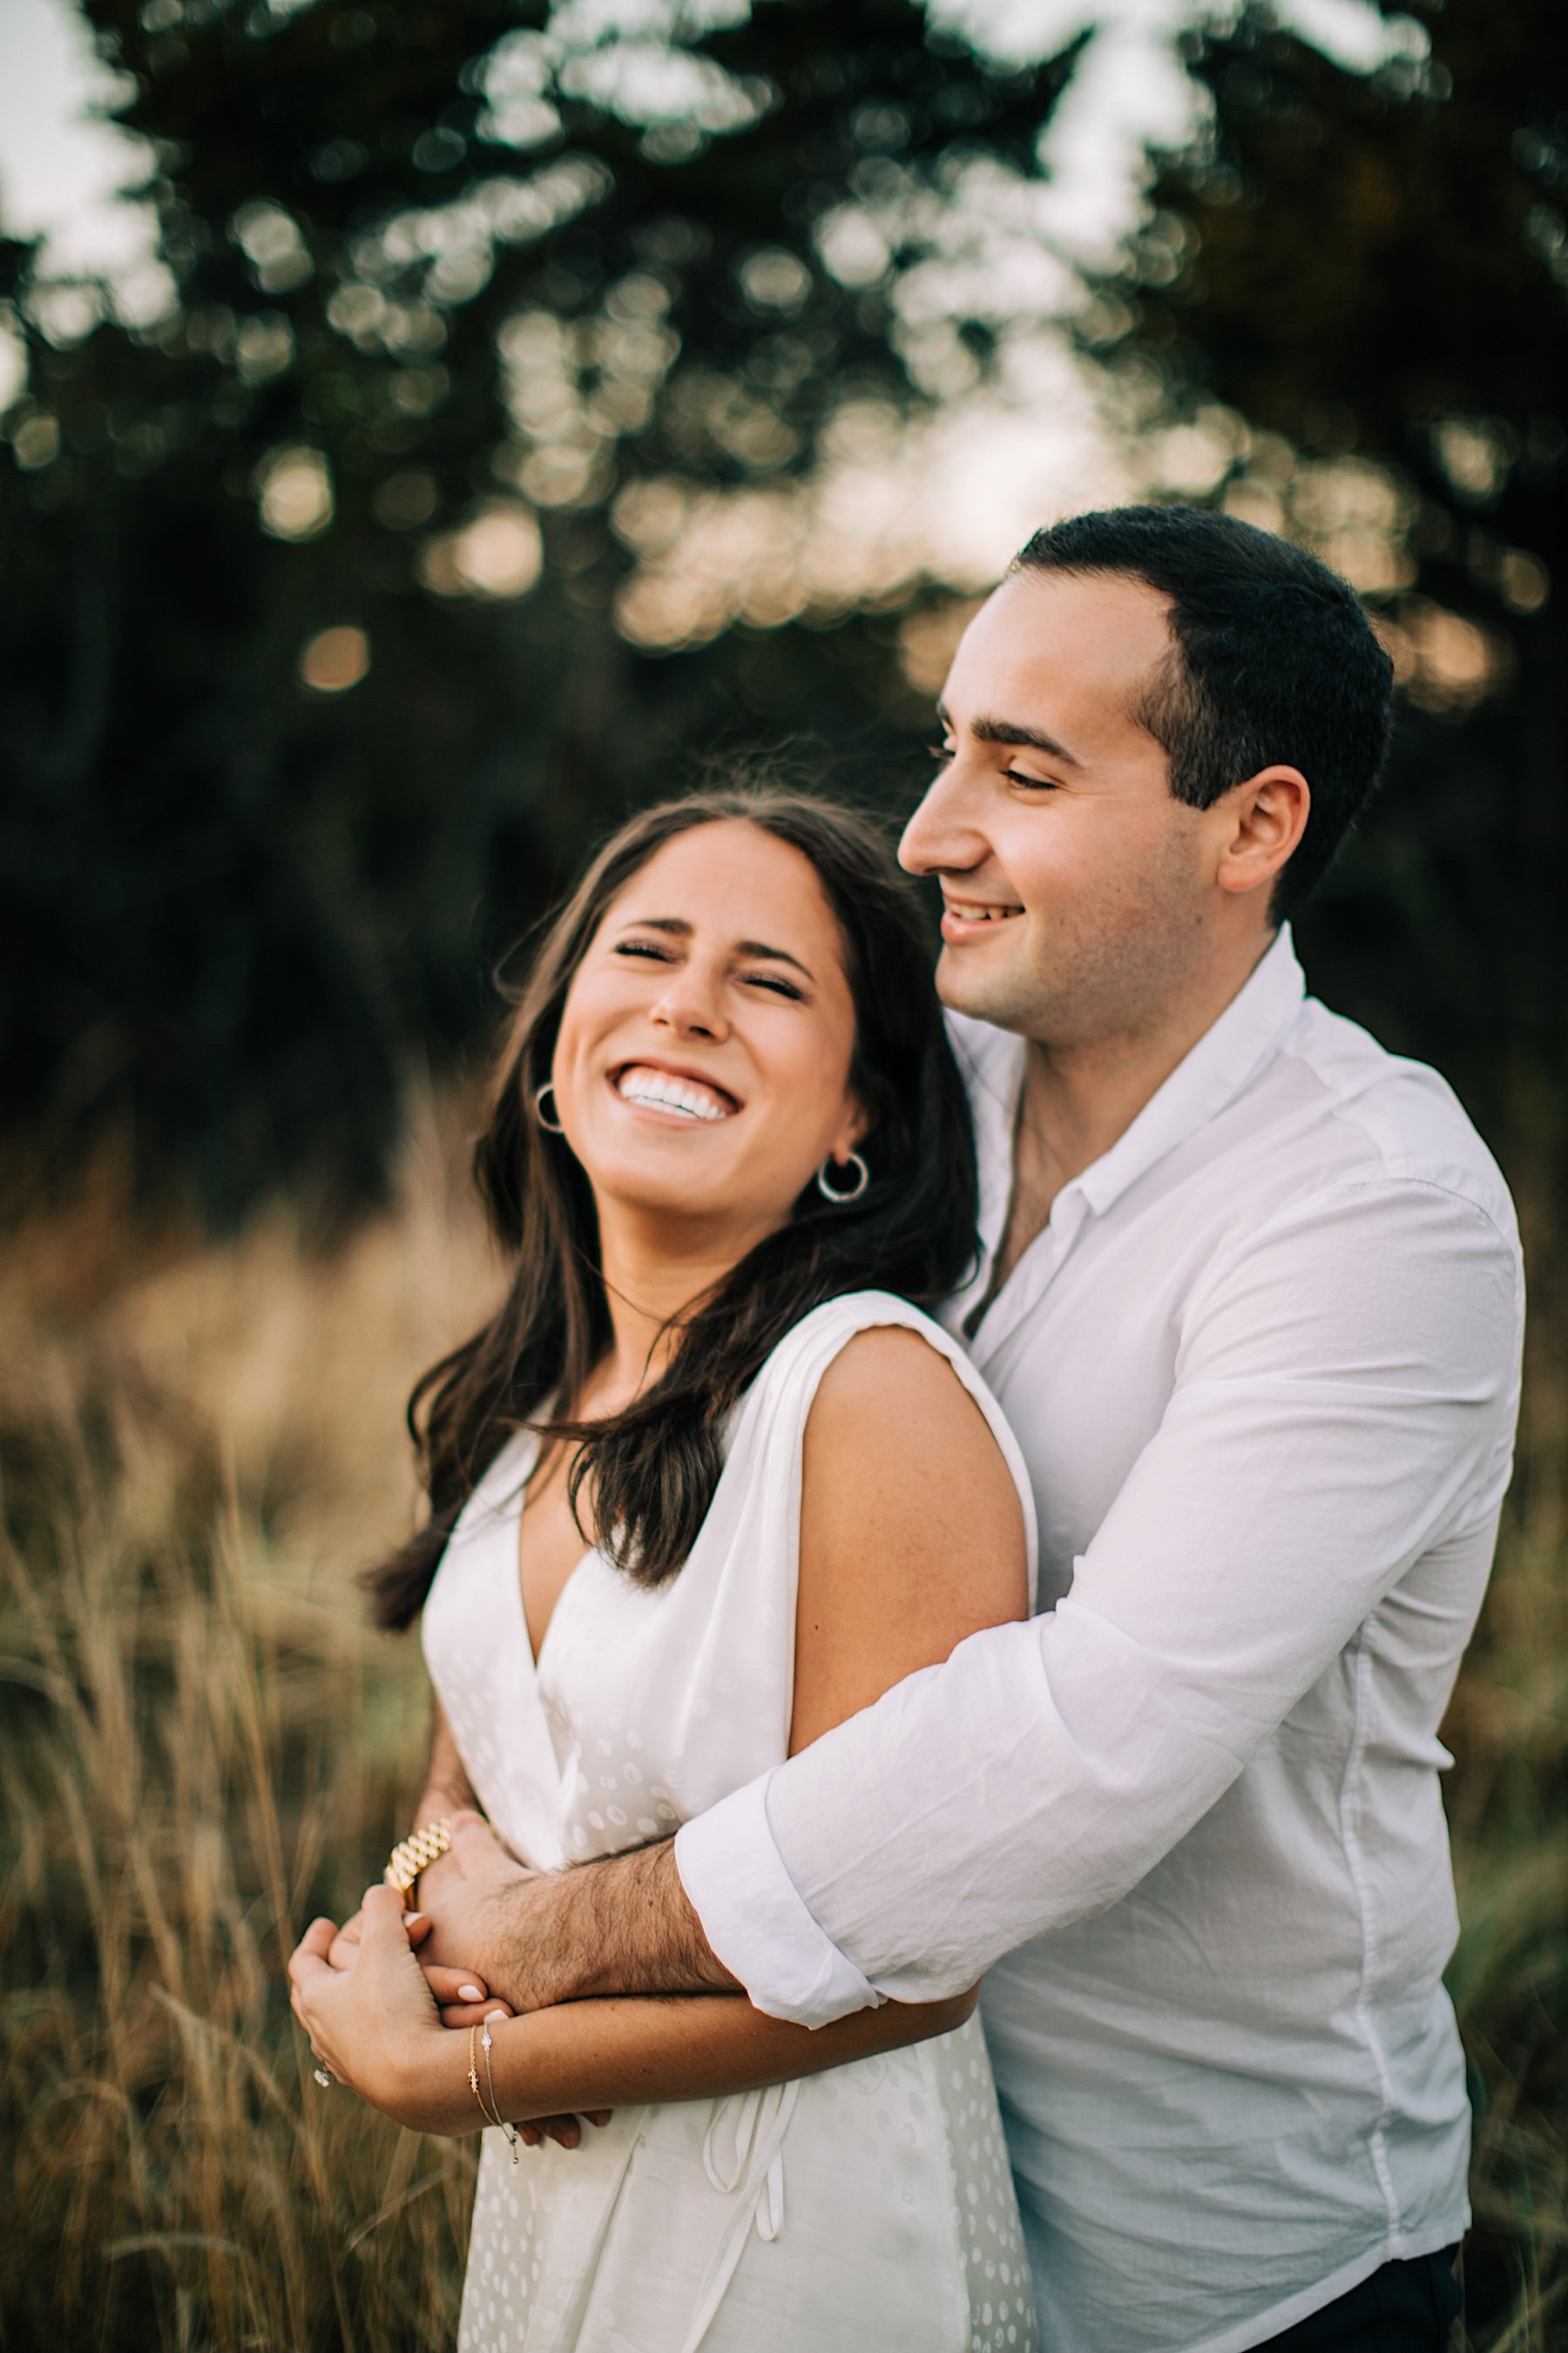 04_laughing during engagement session atlantic highlands.jpg